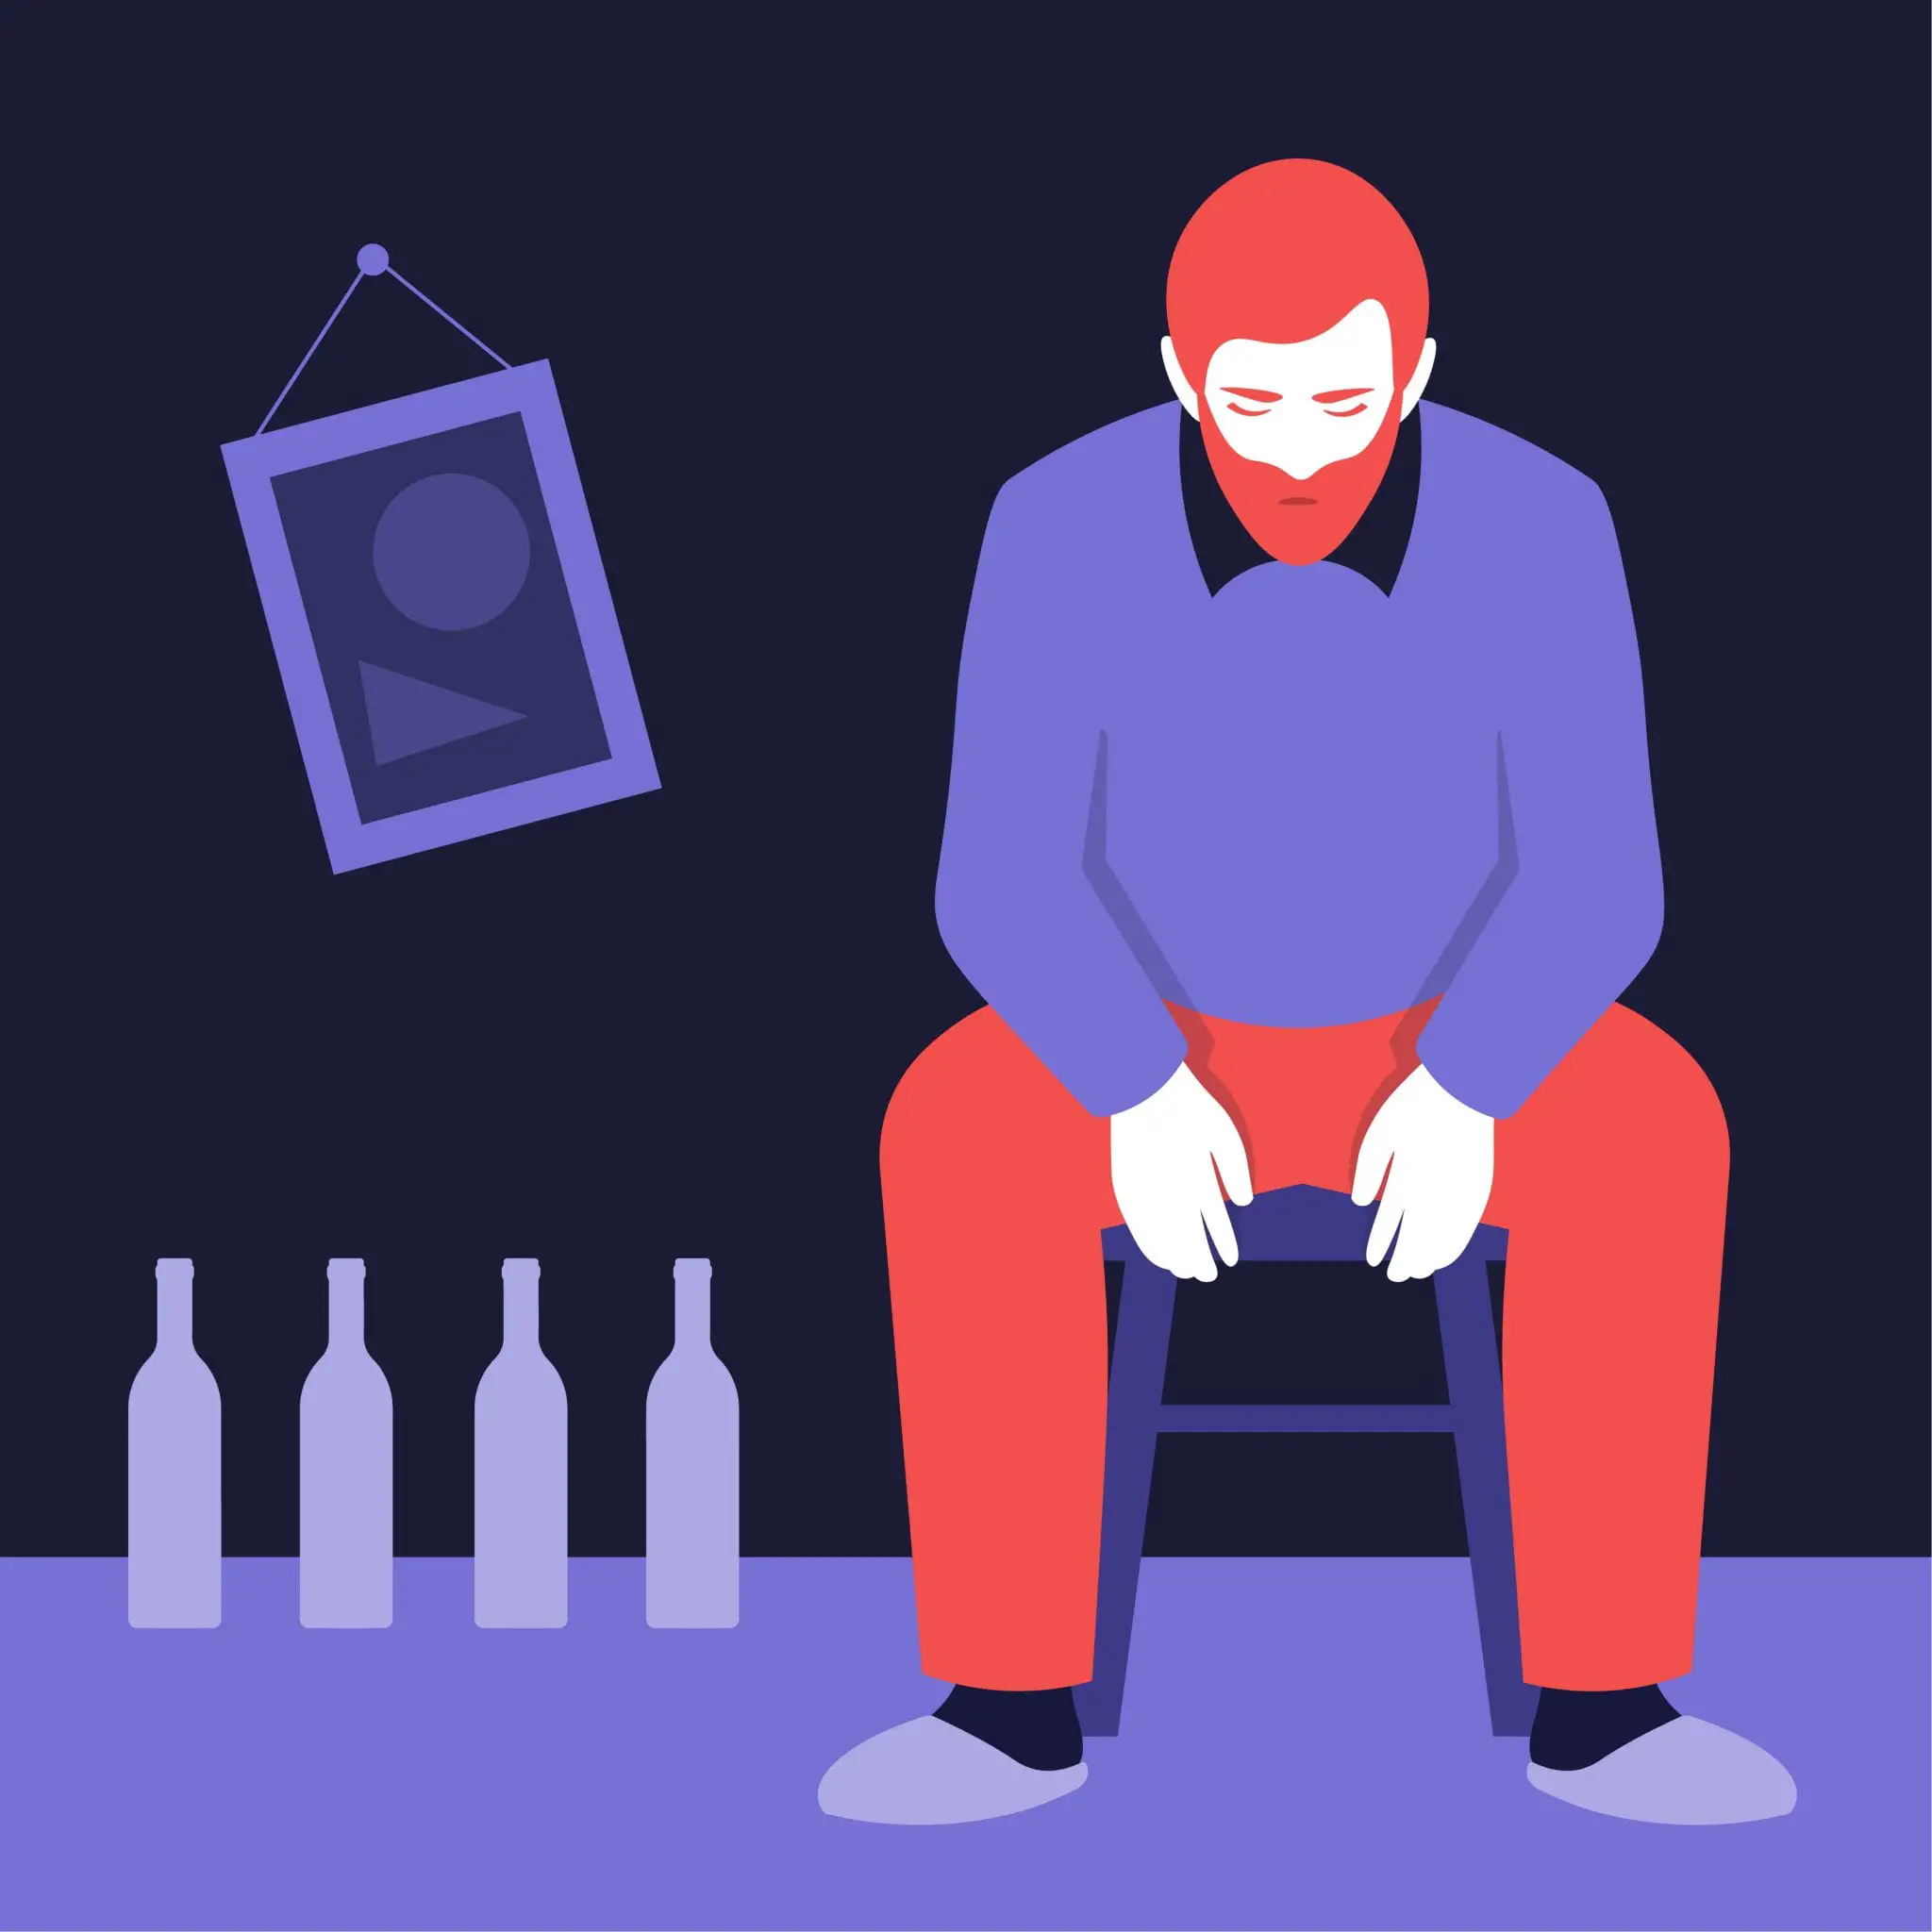 A Male Alcoholic is Sitting on a Stool Next to Empty Bottles of Wine, Psychological Addiction